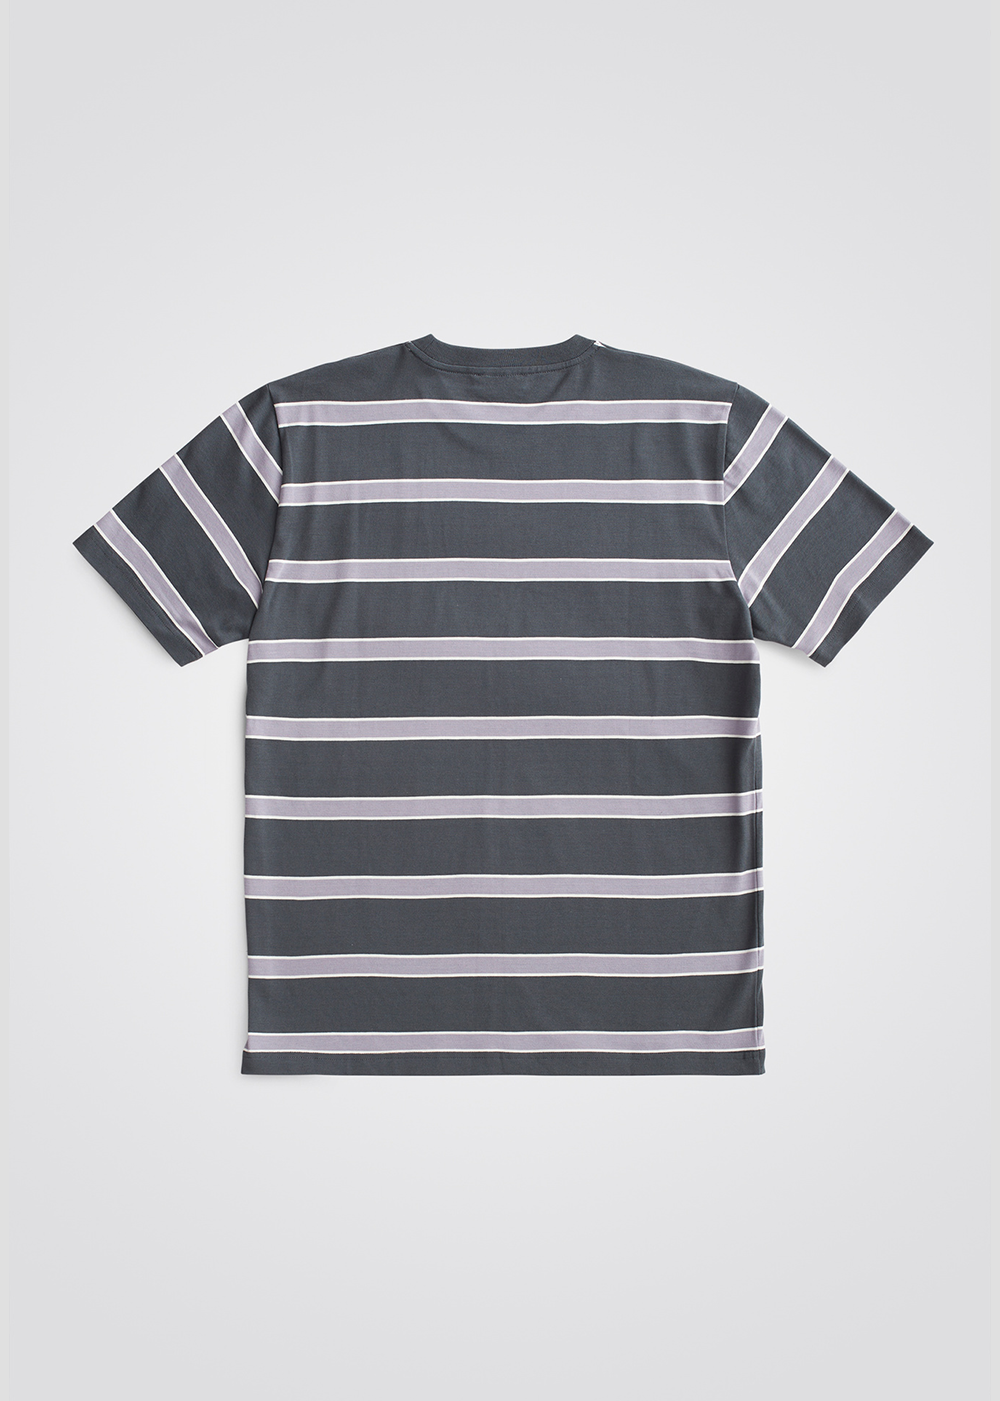 Back view of the Johannes Organic Multicolor Striped T-Shirt by Norse Projects in Battleship Grey.